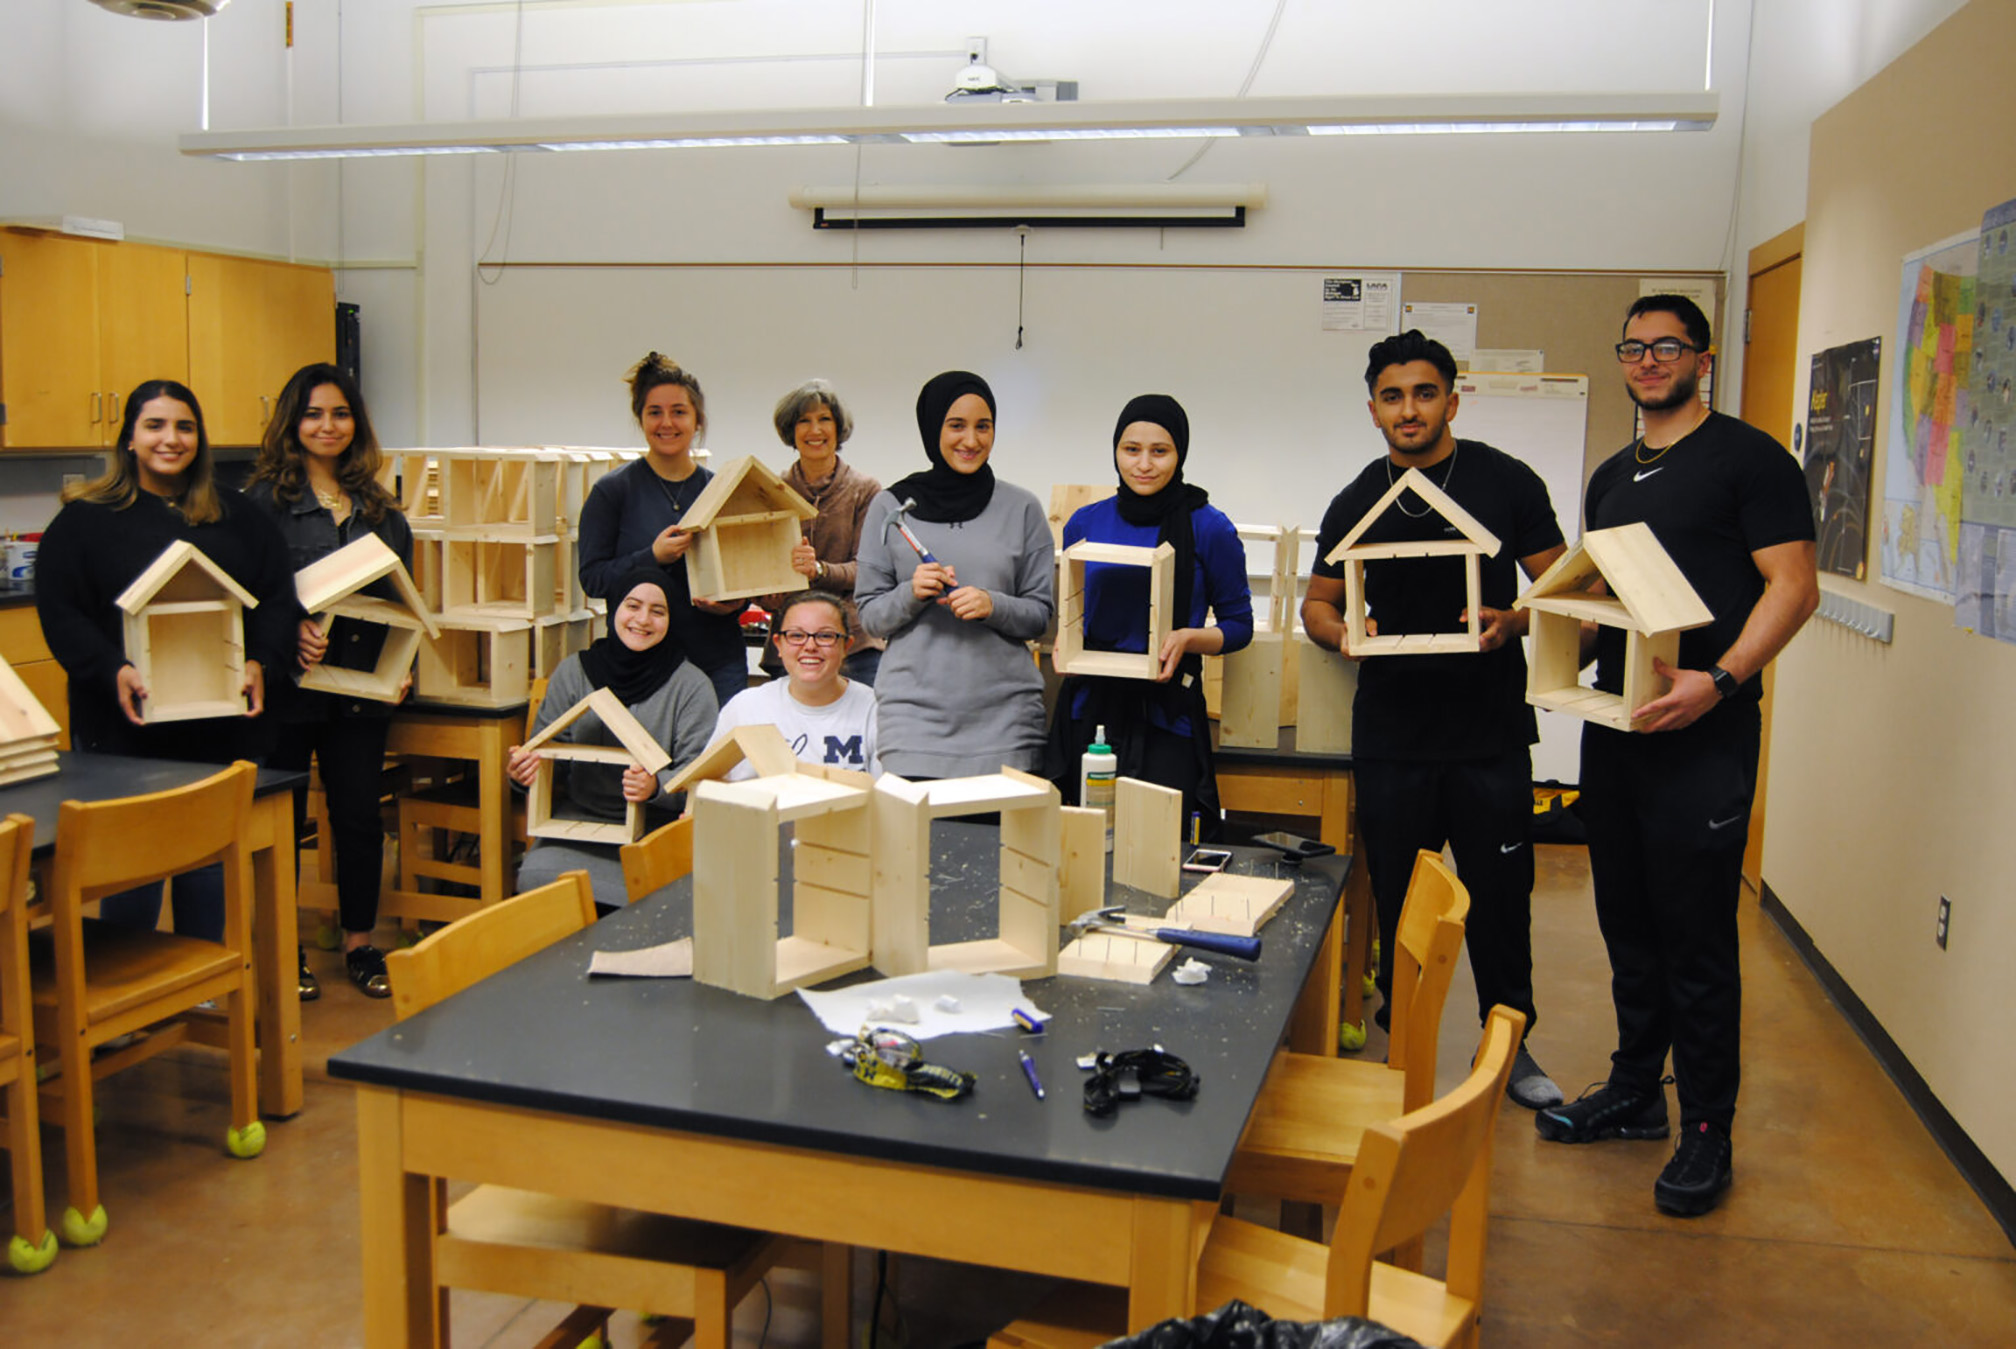 A group of young people standing a classroom holding wooden insect houses that they have been building. Some people have blonde hair, some brown, and some black. A few of the group are wearing head scarfs. The insect houses are square frames with a pointed roof.